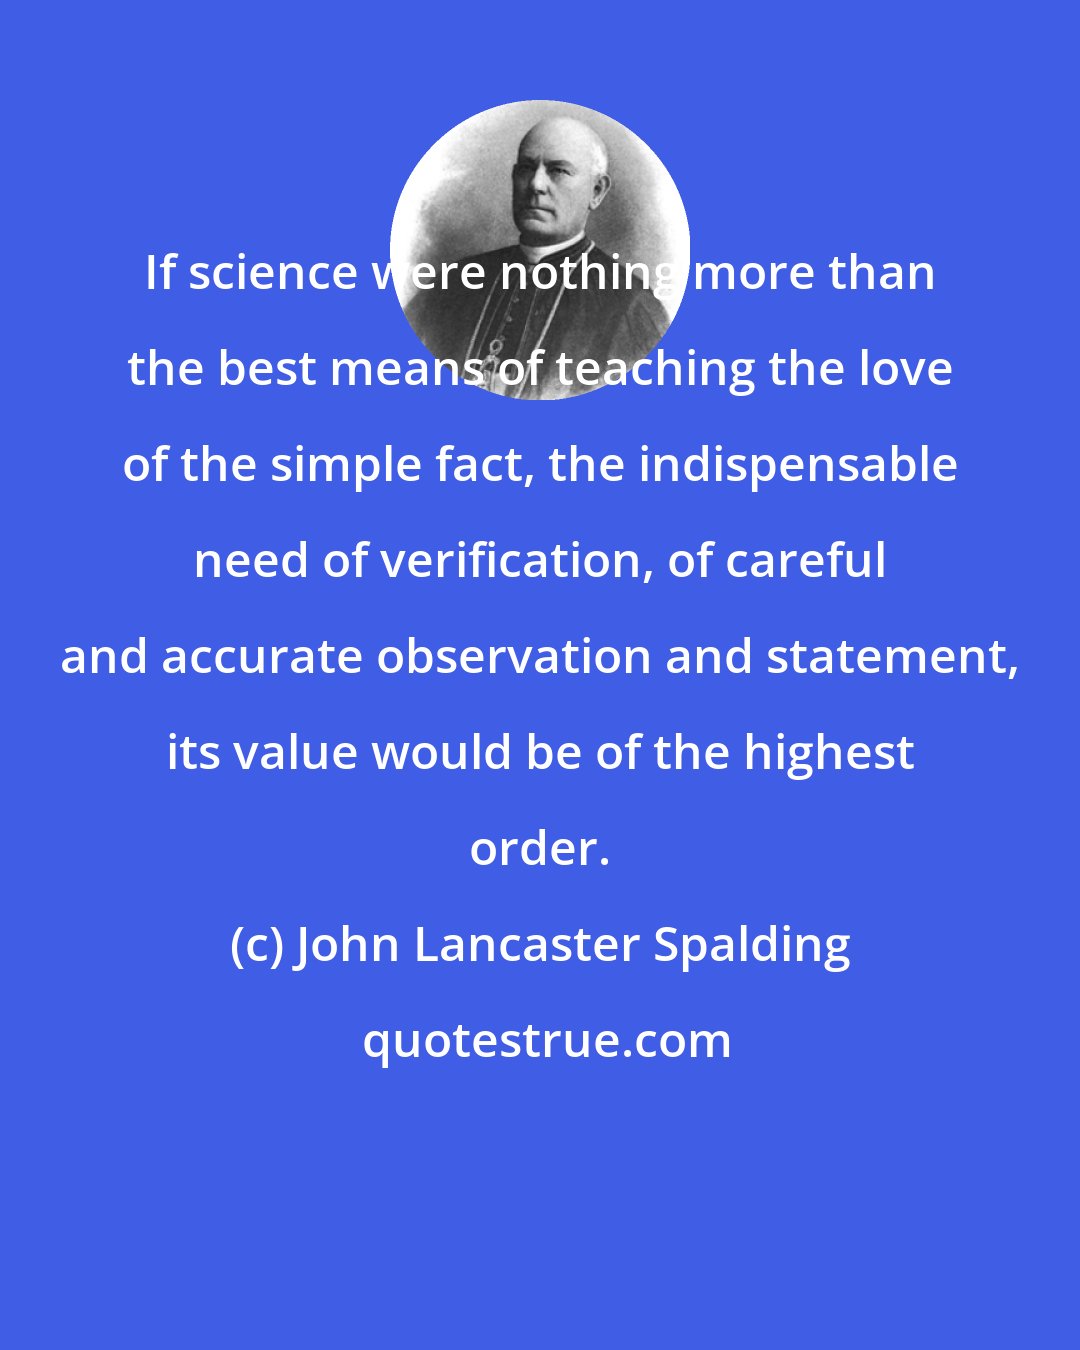 John Lancaster Spalding: If science were nothing more than the best means of teaching the love of the simple fact, the indispensable need of verification, of careful and accurate observation and statement, its value would be of the highest order.